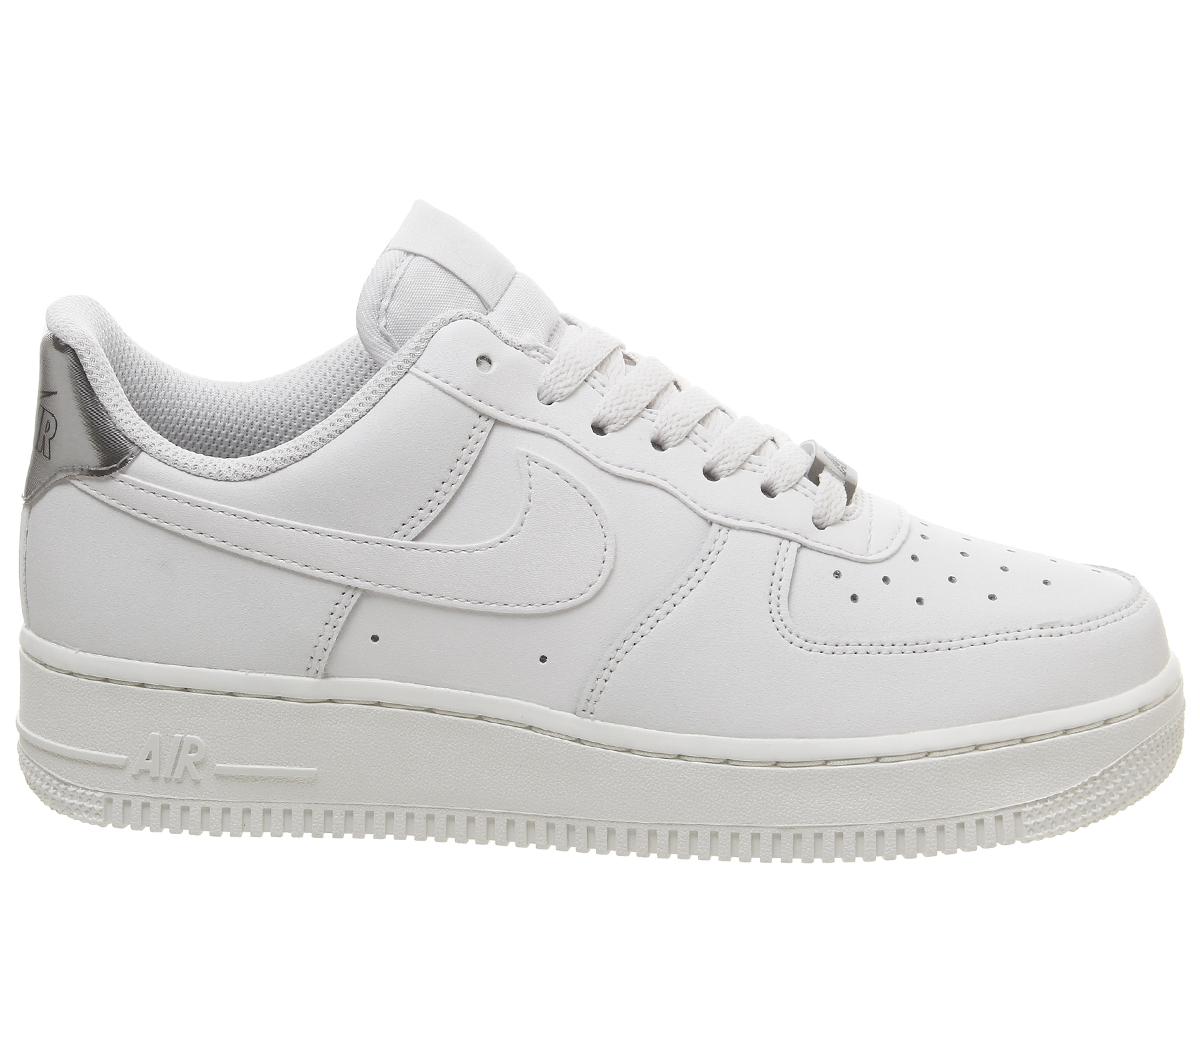 Nike Air Force 1 07 Trainers Platinum Tint Summit White - Women's Trainers